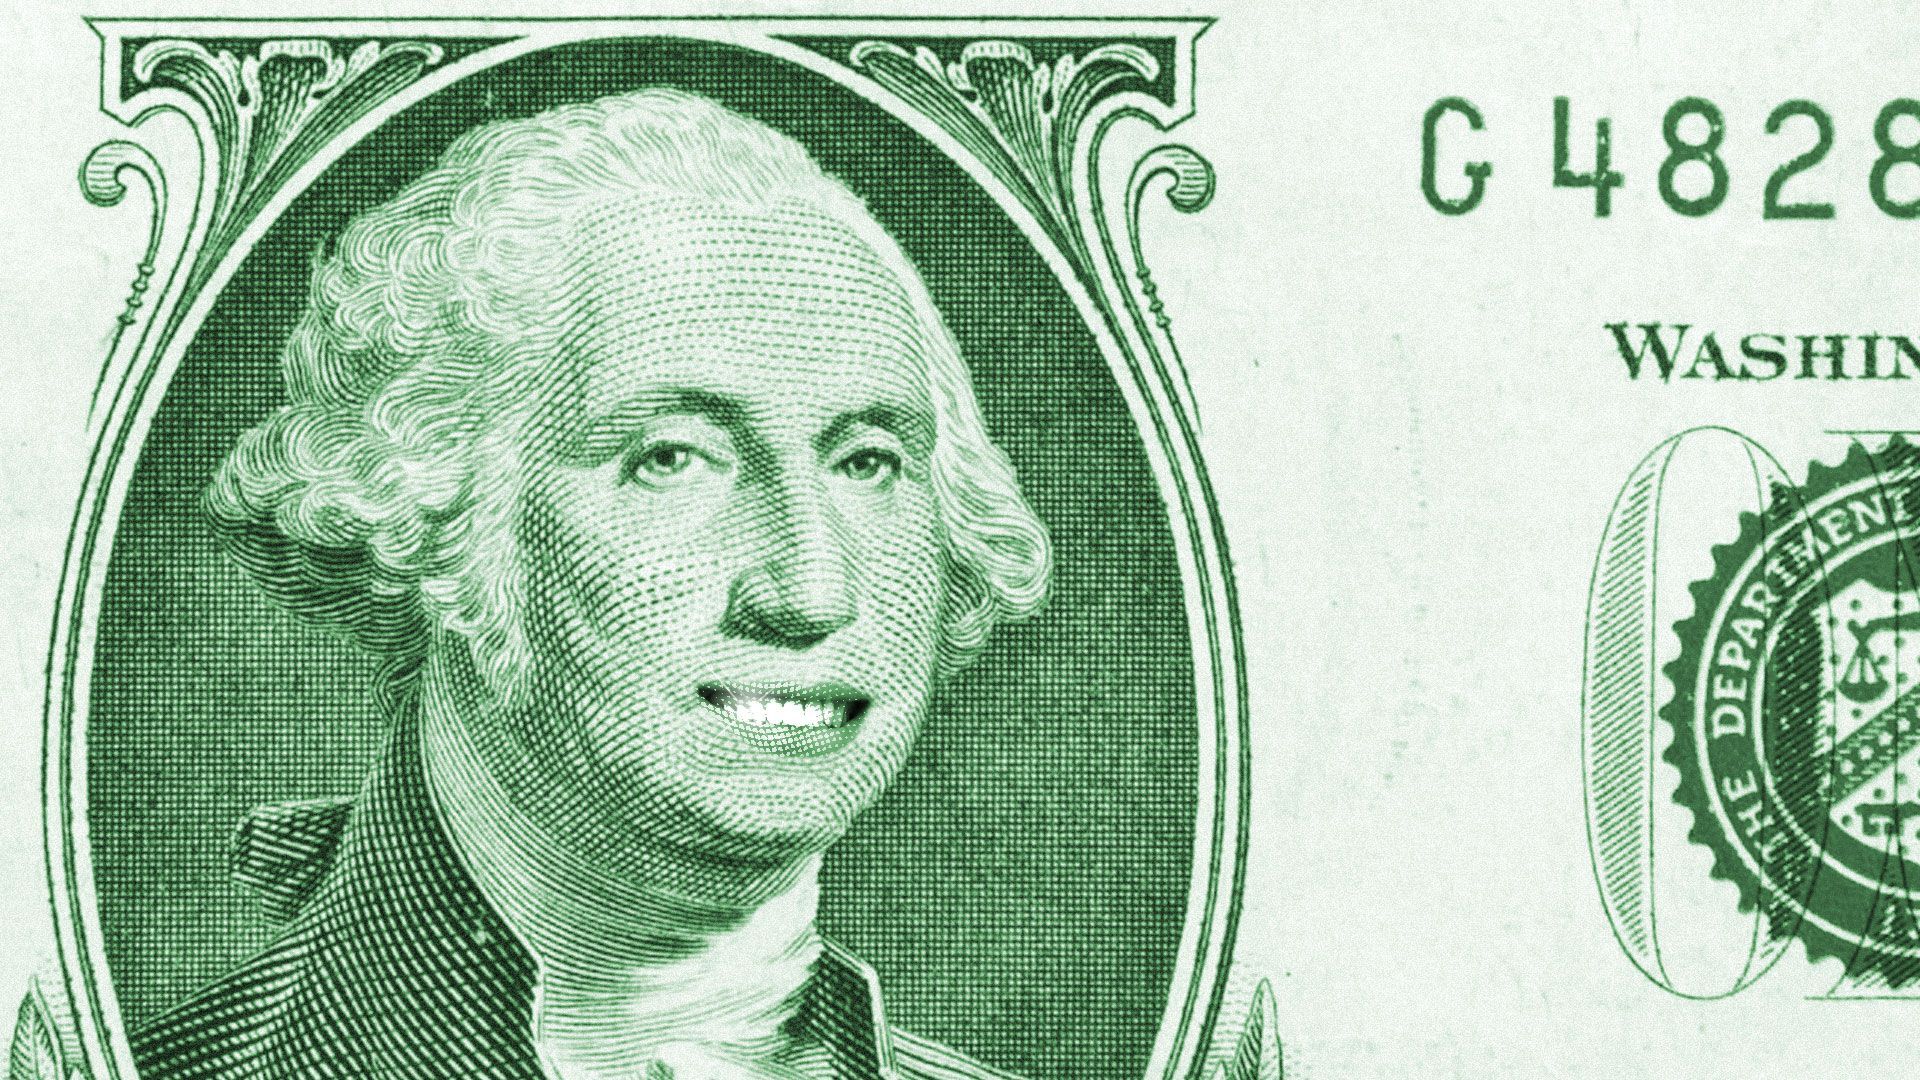 Illustration of a one dollar bill zoomed in to show George Washington smiling with a mouth full of white teeth.